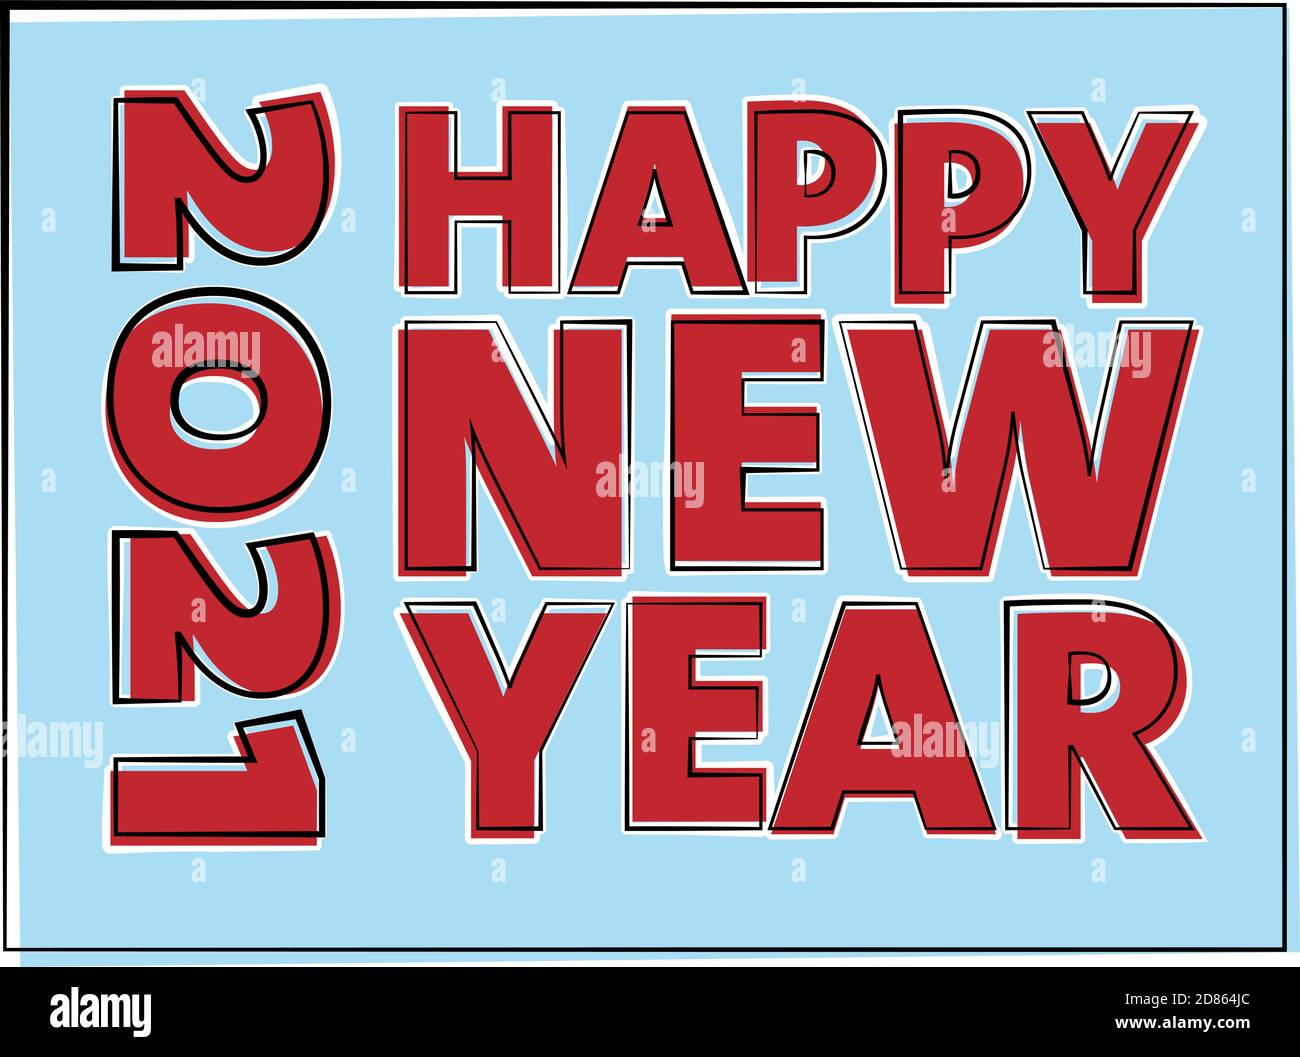 HAPPY NEW YEAR 2021 greeting card or sticker vector illustration Stock Vector